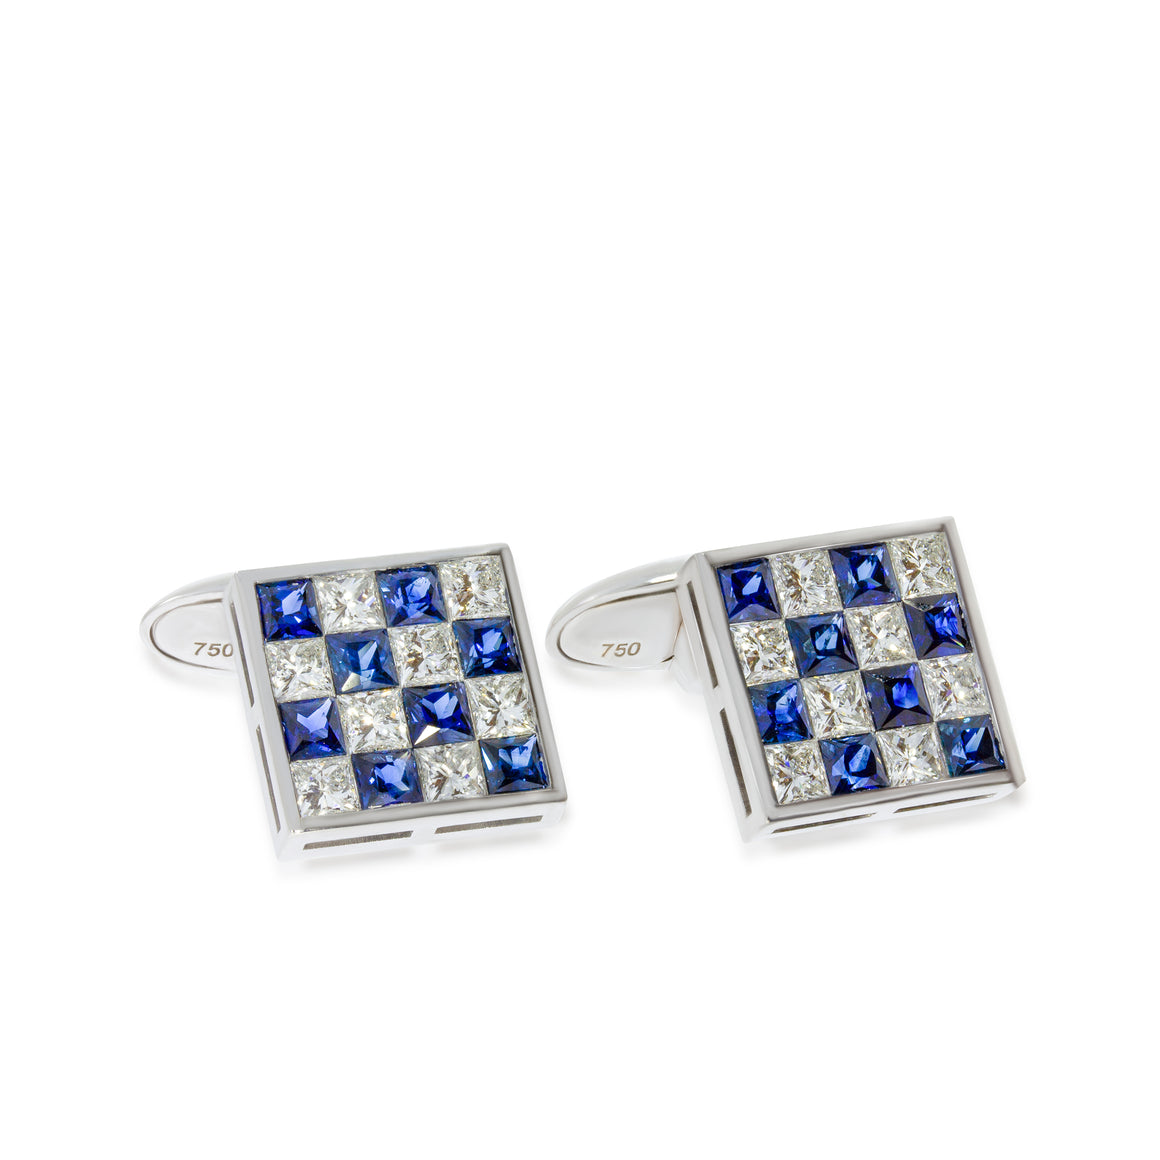 Classic Cufflinks Invisible Set with Slots of diamonds and blue Sapphir on 18k white gold, Square Cut. Elegant Diamonds Cufflinks.